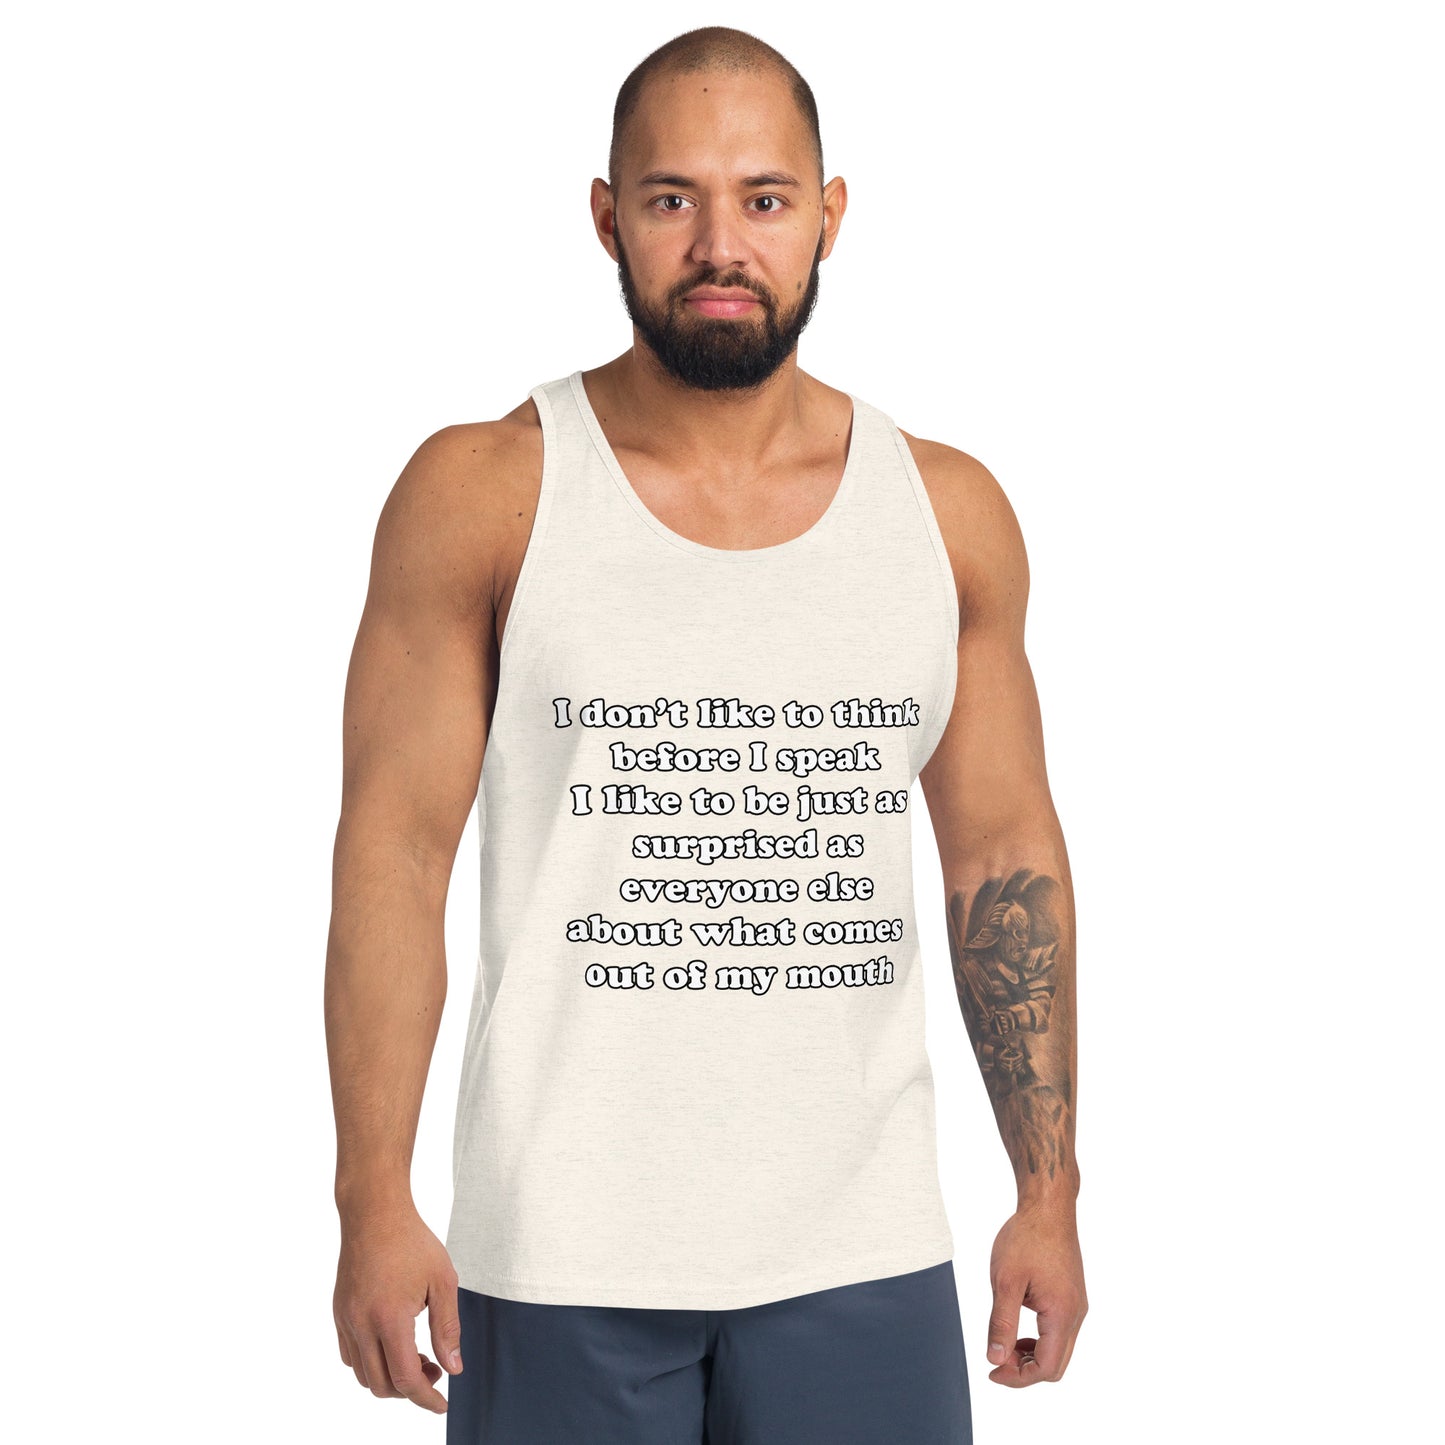 Man with oatmeal white tank top with text “I don't think before I speak Just as serprised as everyone about what comes out of my mouth"